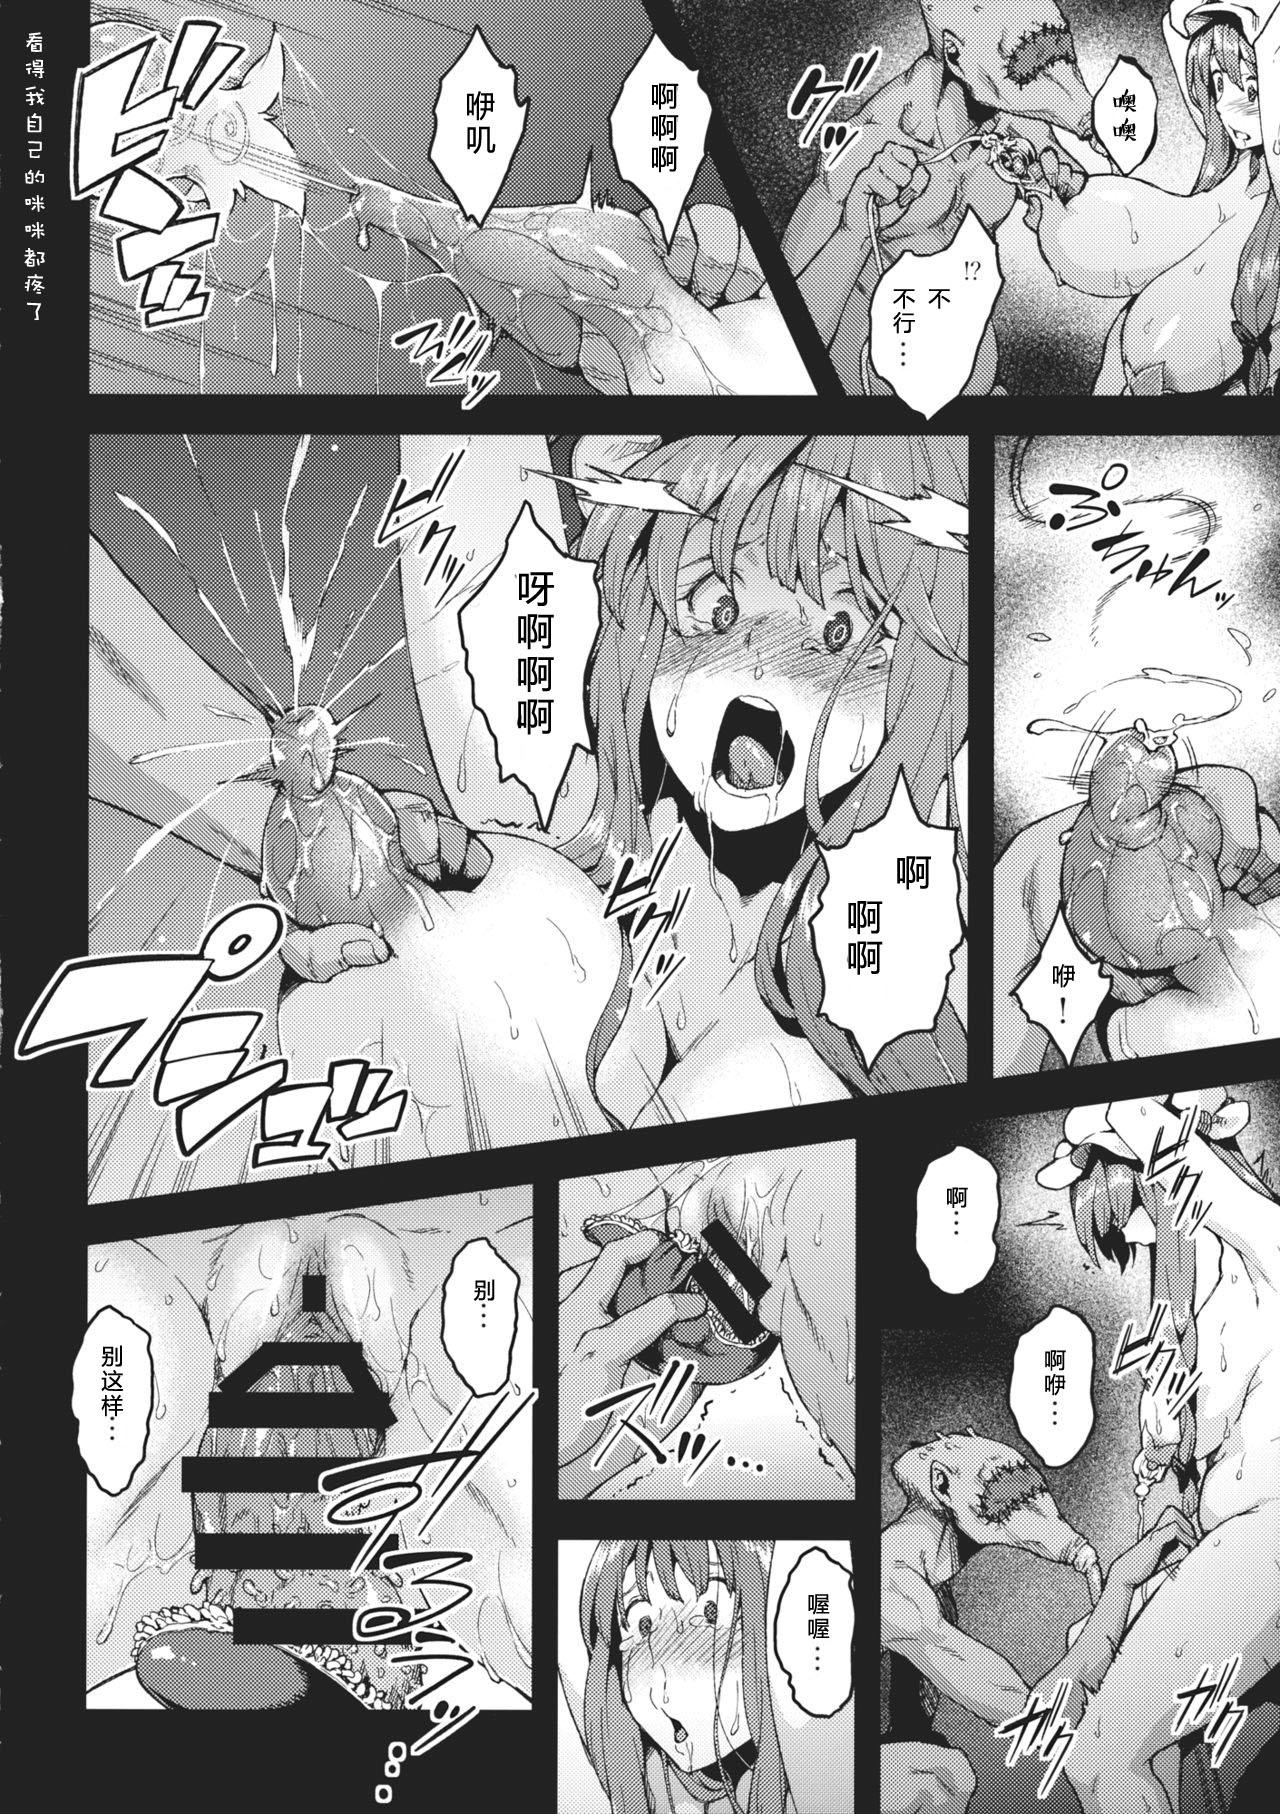 Jav Pache Otoshi after II - Touhou project Belly - Page 7